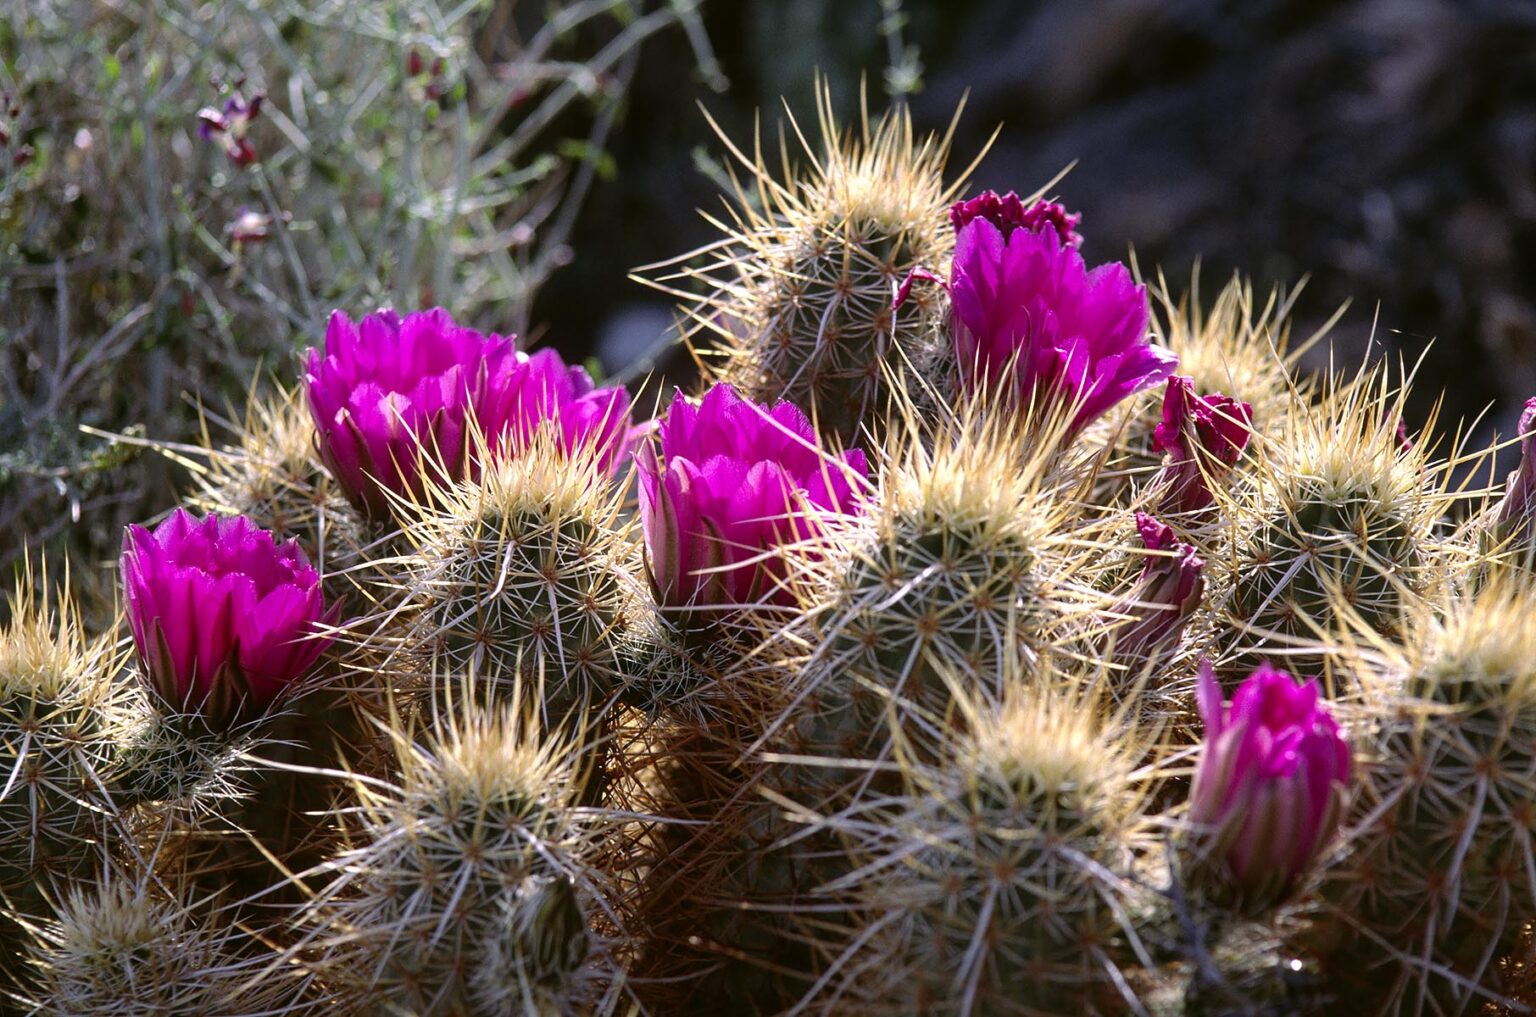 Magenta FLOWERS of FOXTAIL CACTUS (Coryphantha vivipara) - PINACATE NATIONAL PARK, SONORA, MEXICO